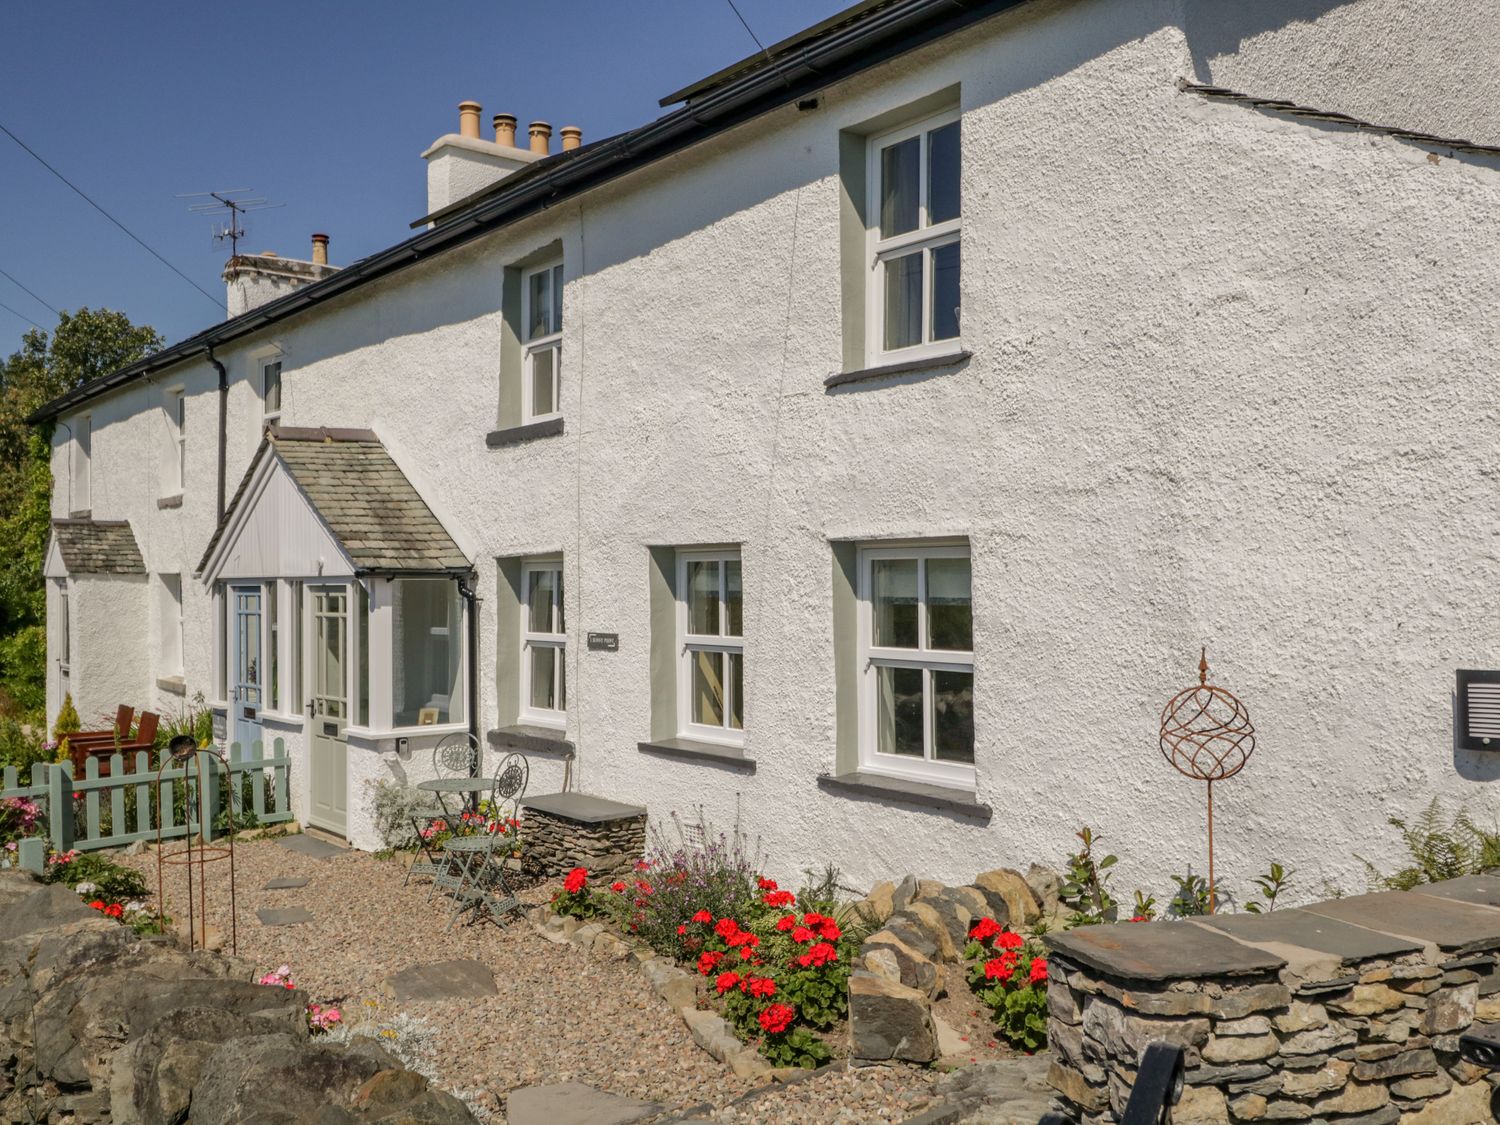 1 Sunny Point Cottages - Lake District - 1044404 - photo 1